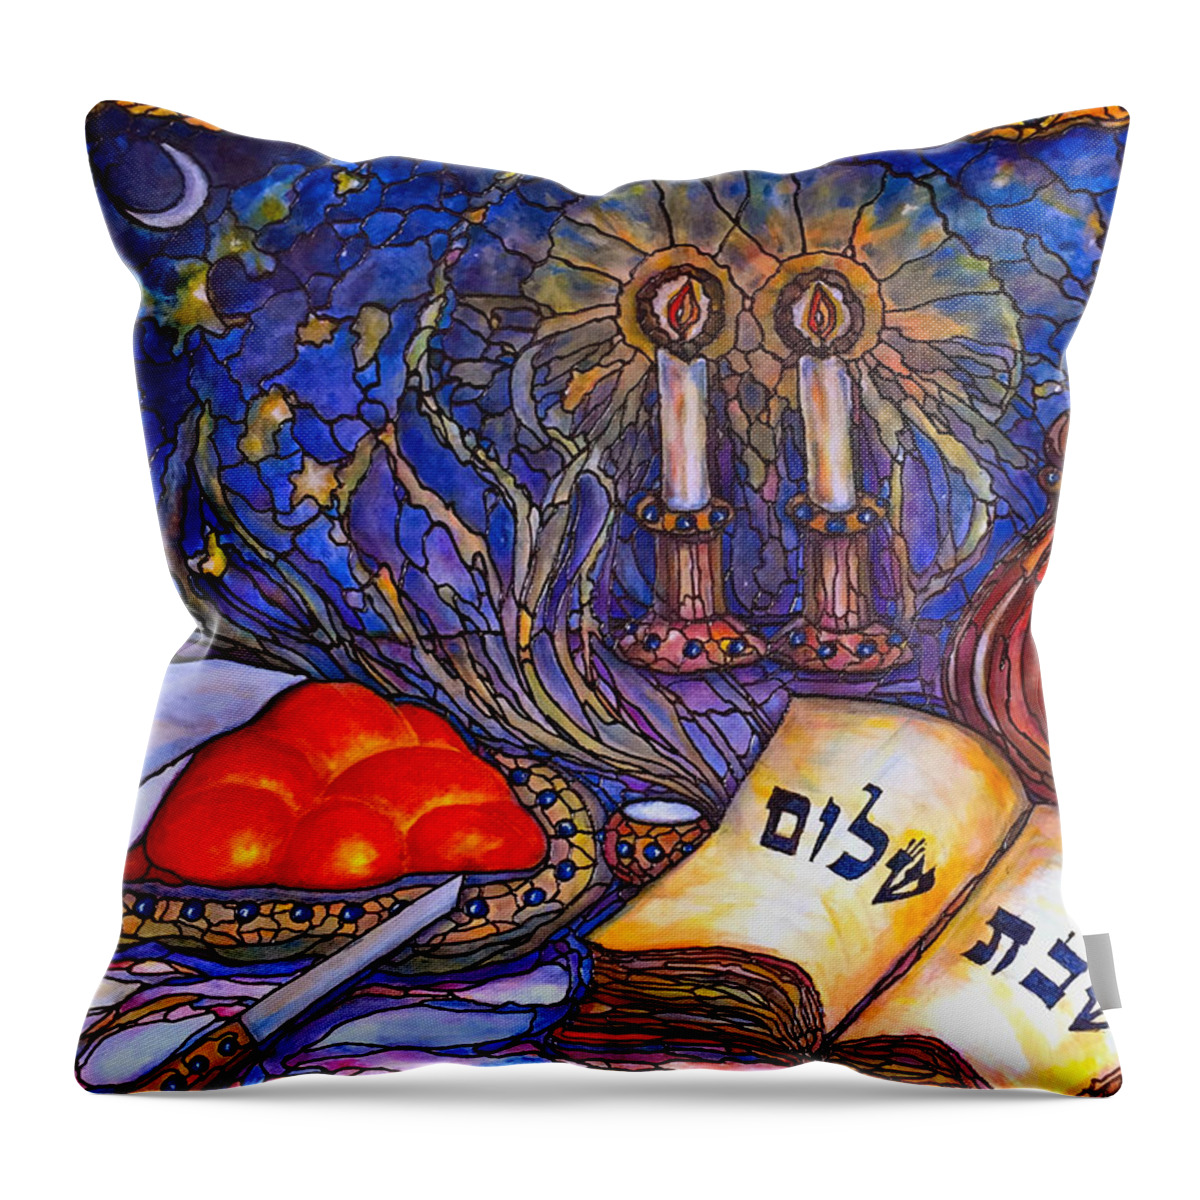 Original Painting Throw Pillow featuring the painting Shabbat Shalom by Rae Chichilnitsky